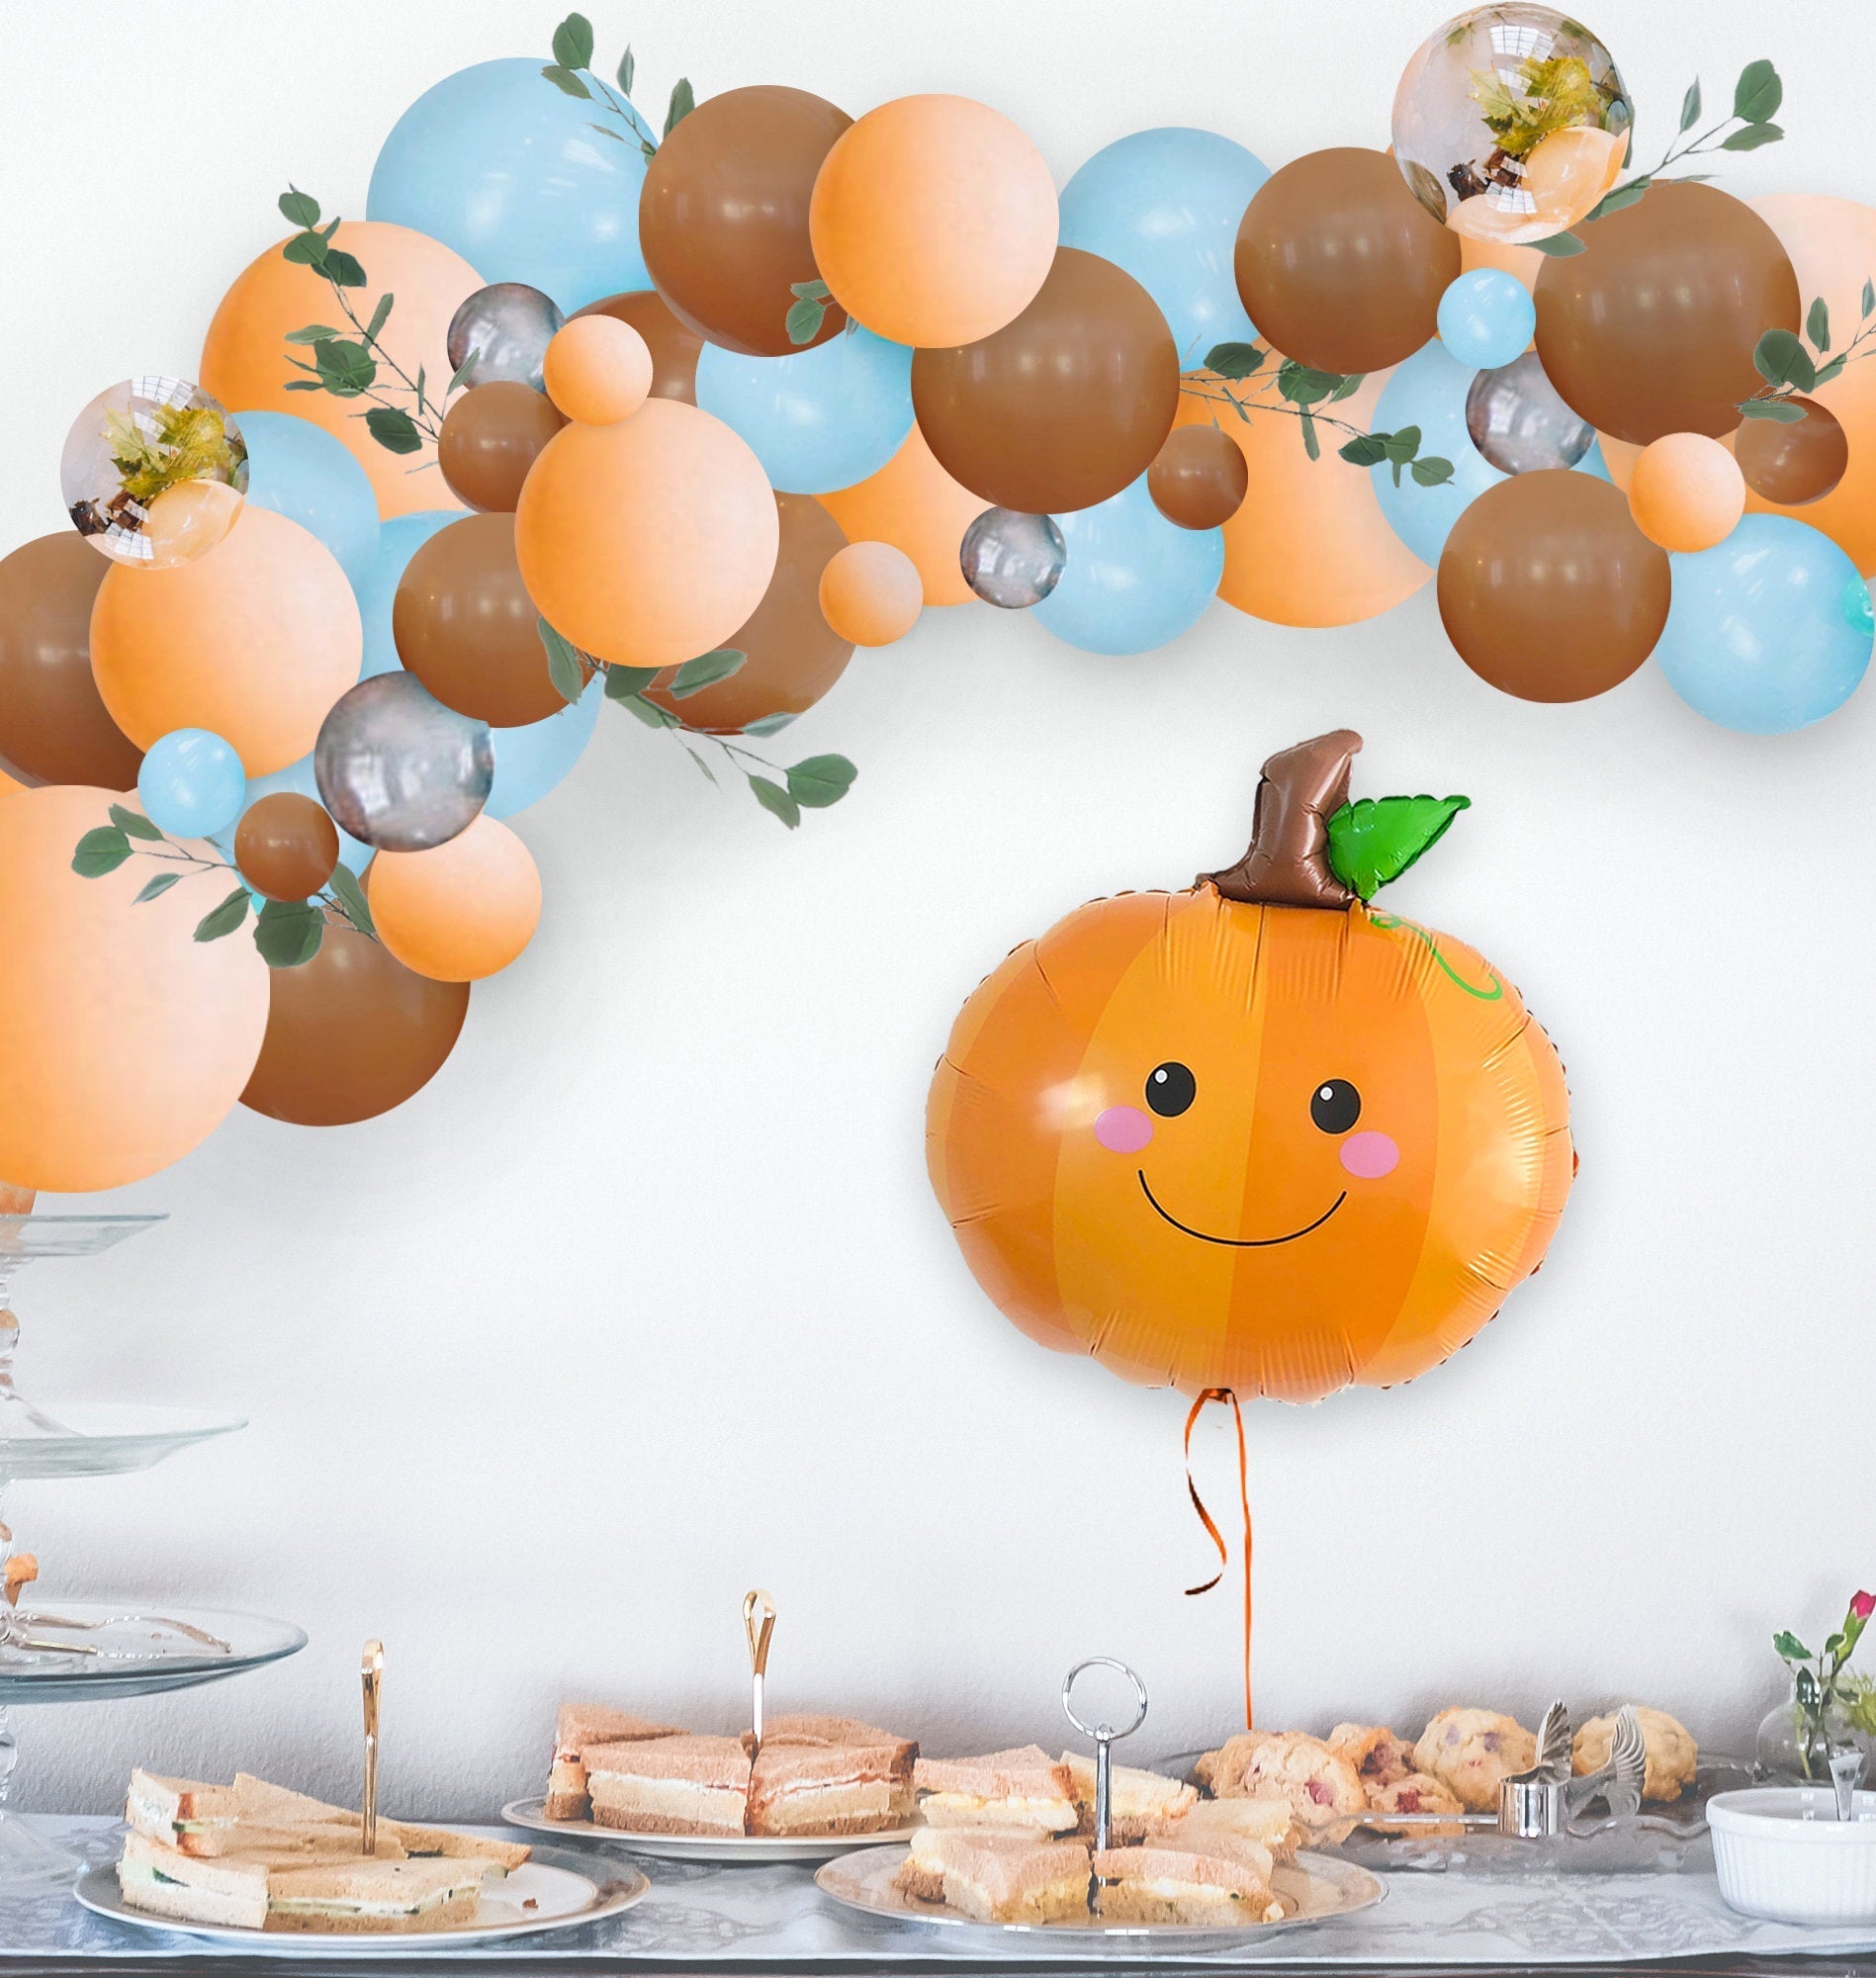 Fall Brown & Orange Balloon Arch Garland Kit from Ellie's Party Supply